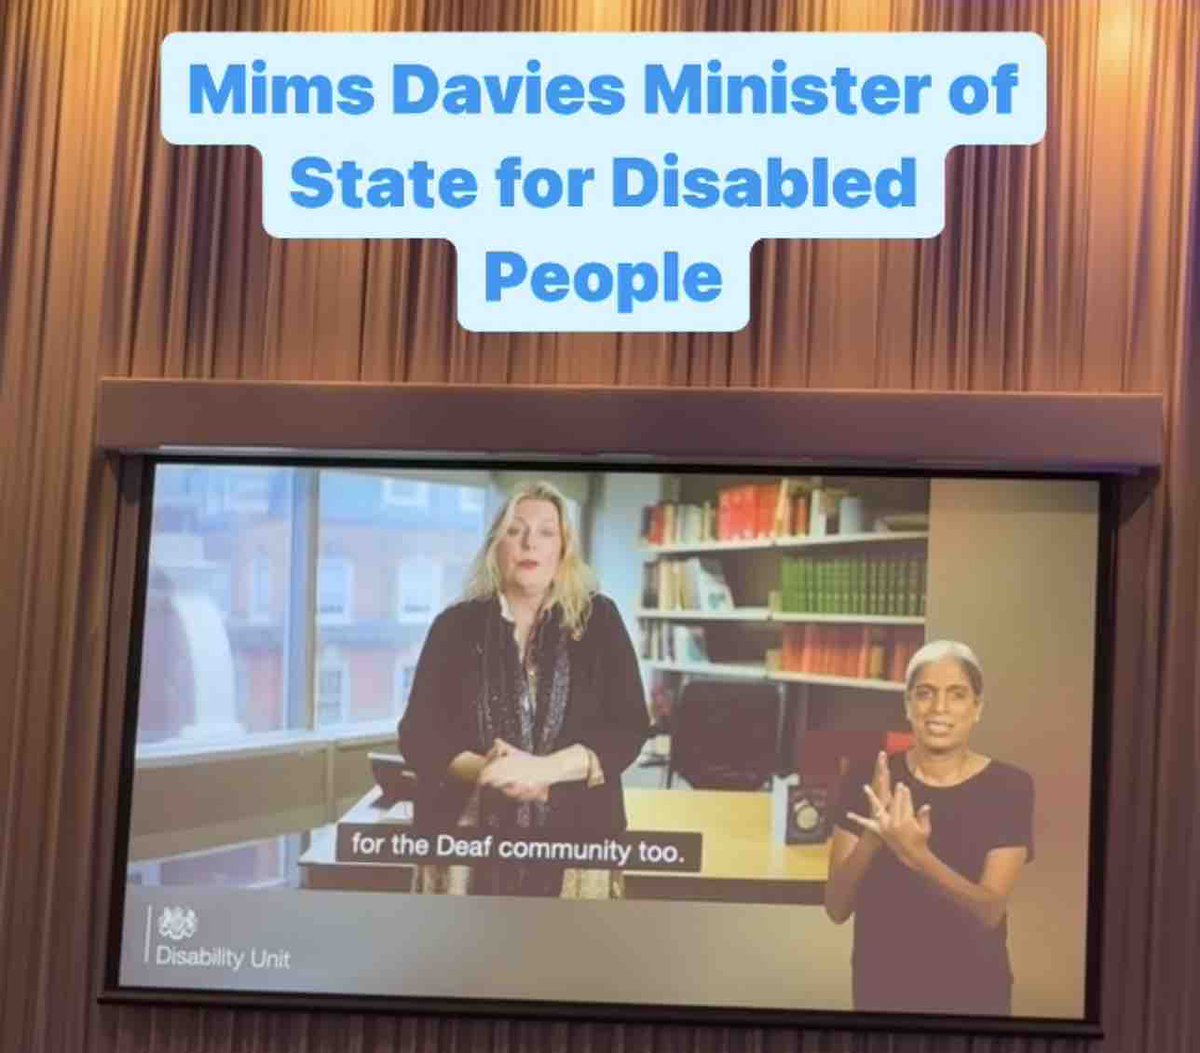 Mims Davies MP, the Minister for Disabled People (@mimsdavies) welcomed us in a video at #BSLConference2024. #BDA #BSLConference2024 #BSLinourhands